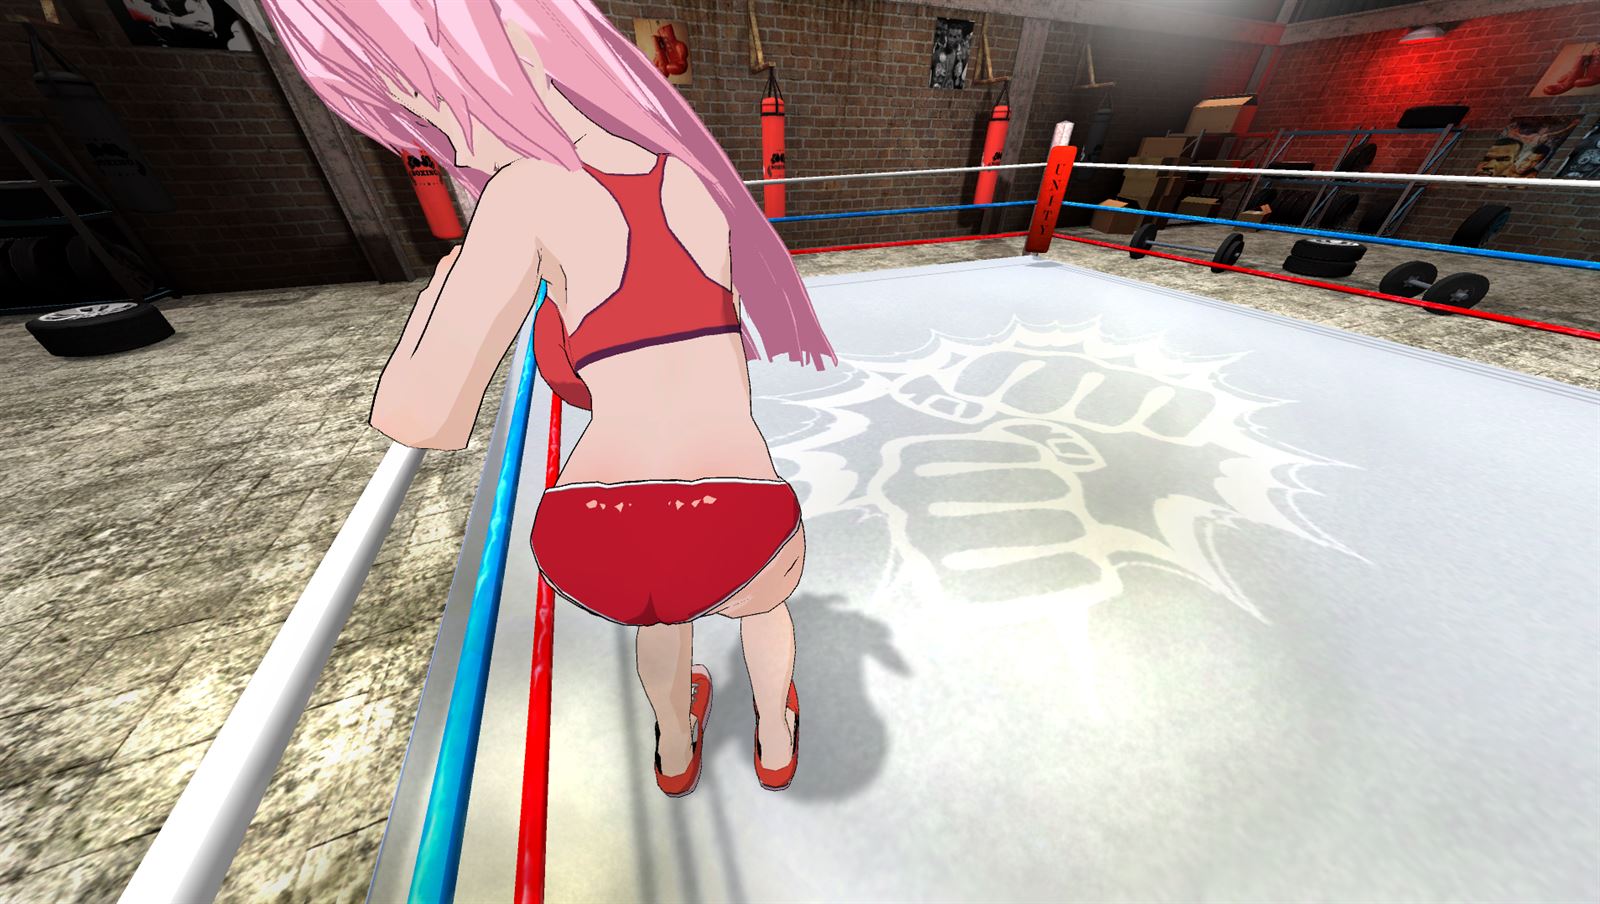 VR game Fight, or be gassed the girl will avoid your attacks, agitate you a...